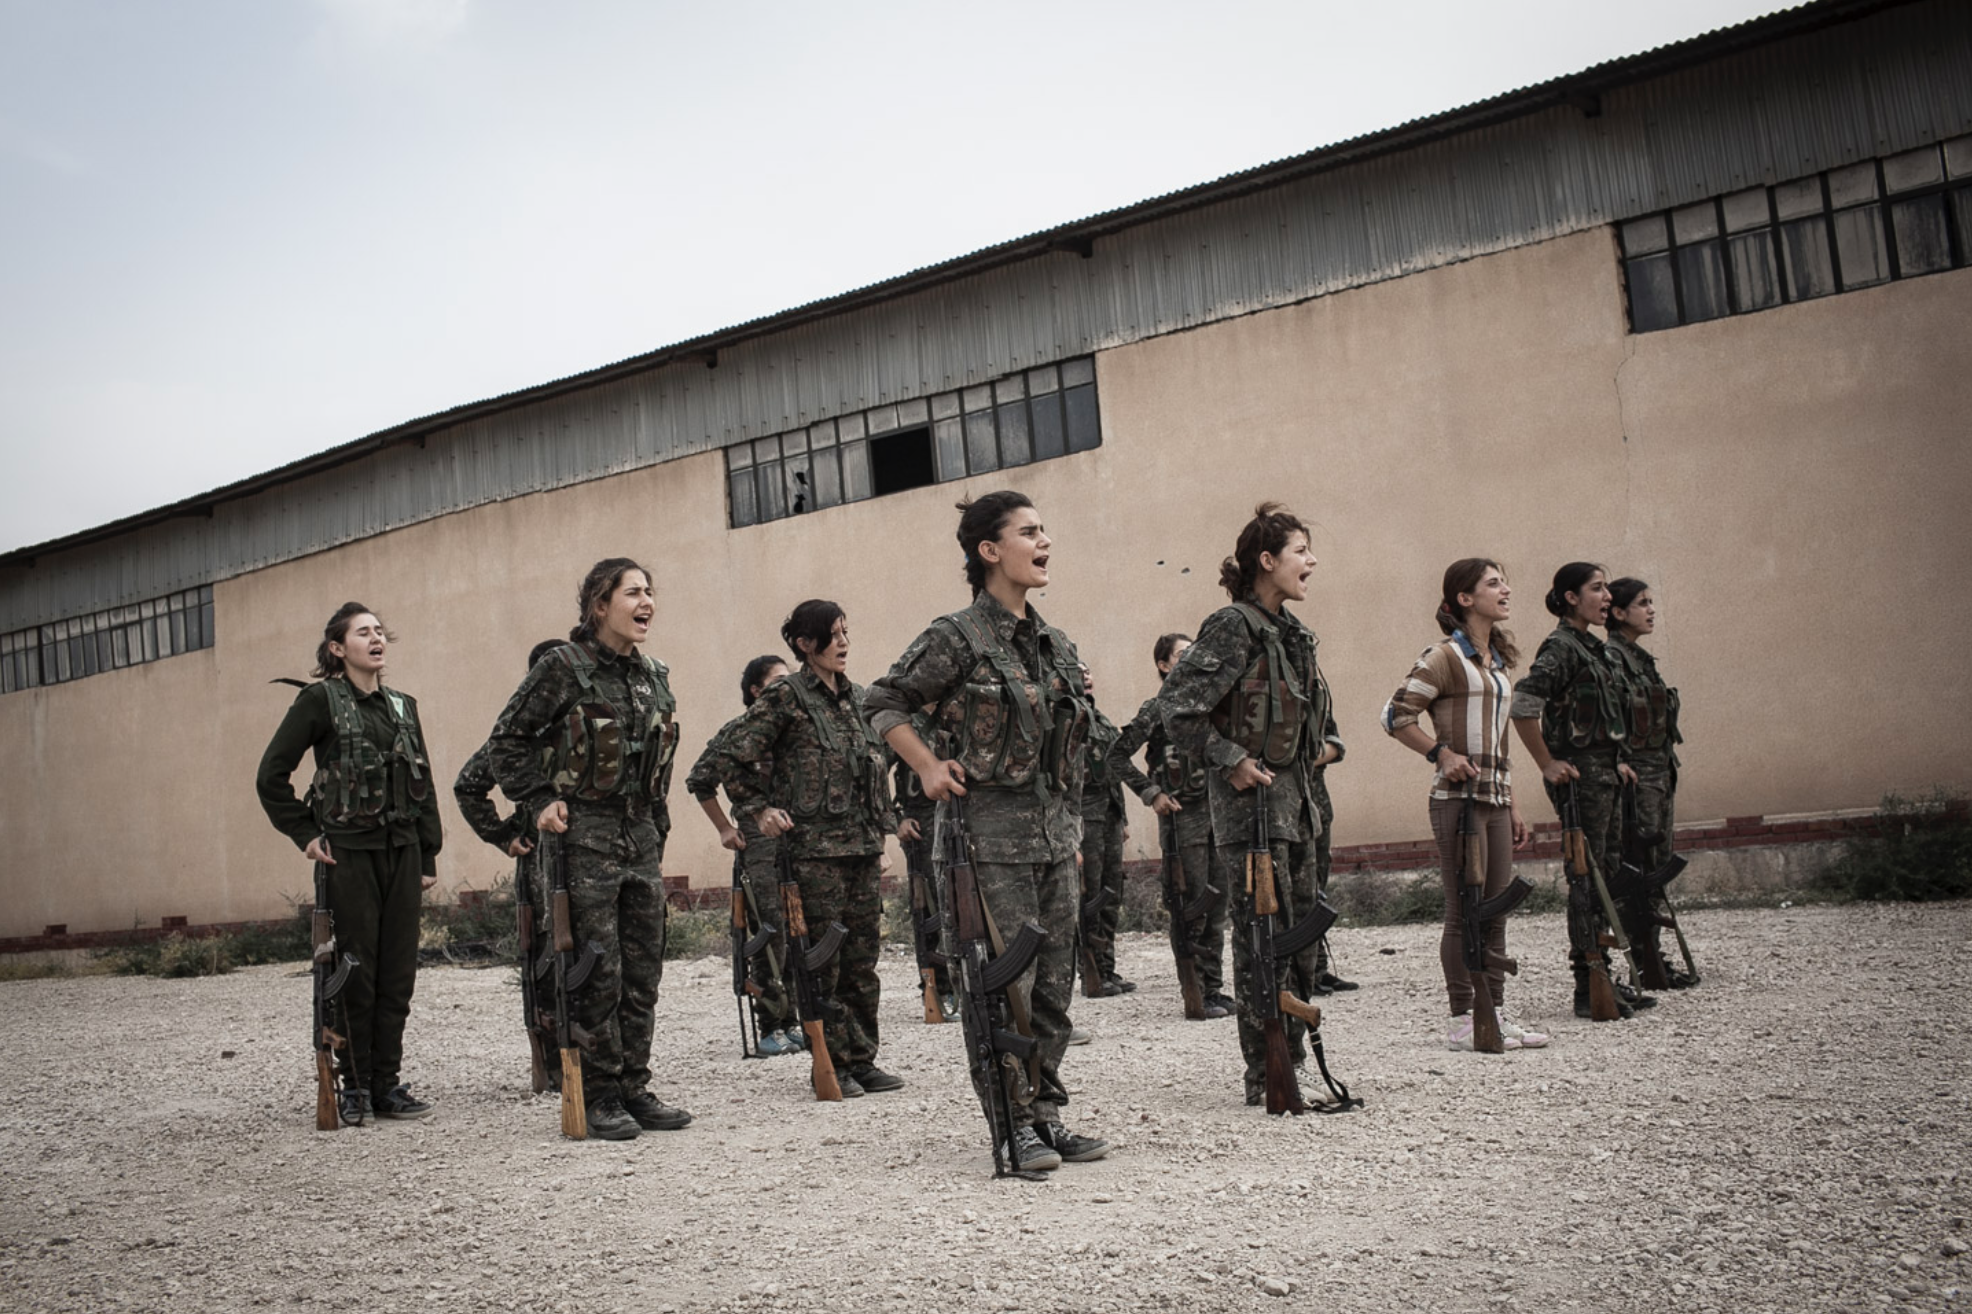  Young YPJ recruits participate in drills at dawn near Derek City, Syria. The YPJ schedule is demanding and discipline driven - new recruits get 6 hours of sleep and wake at 4 AM for physical training; afterwards, their day consists of drills and cla